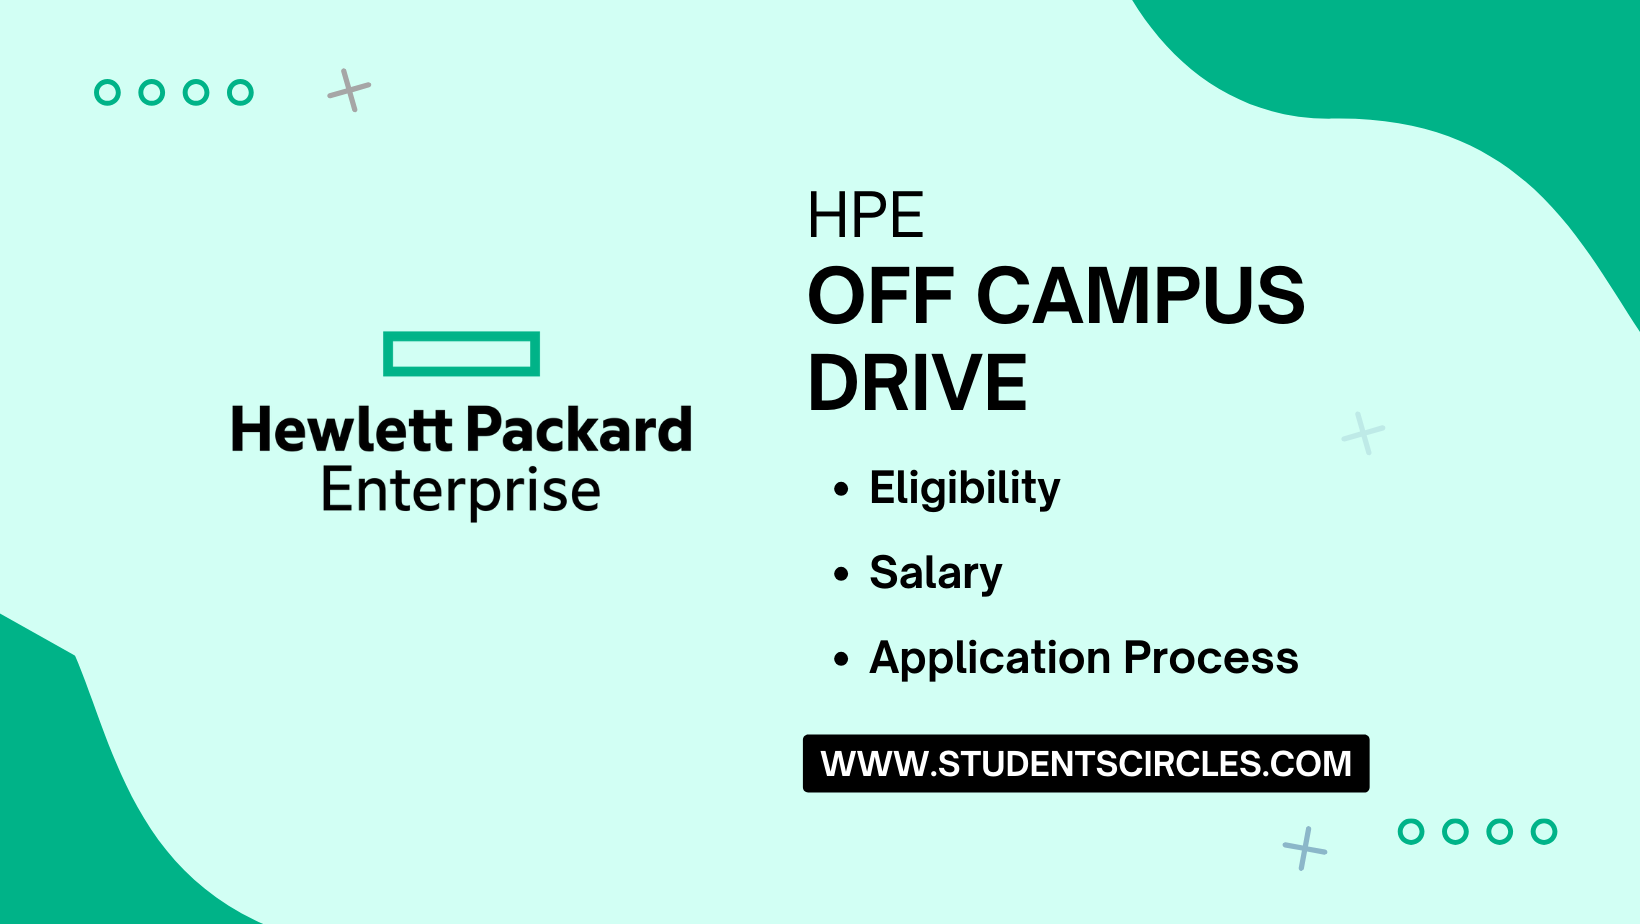 HPE Off Campus Drive